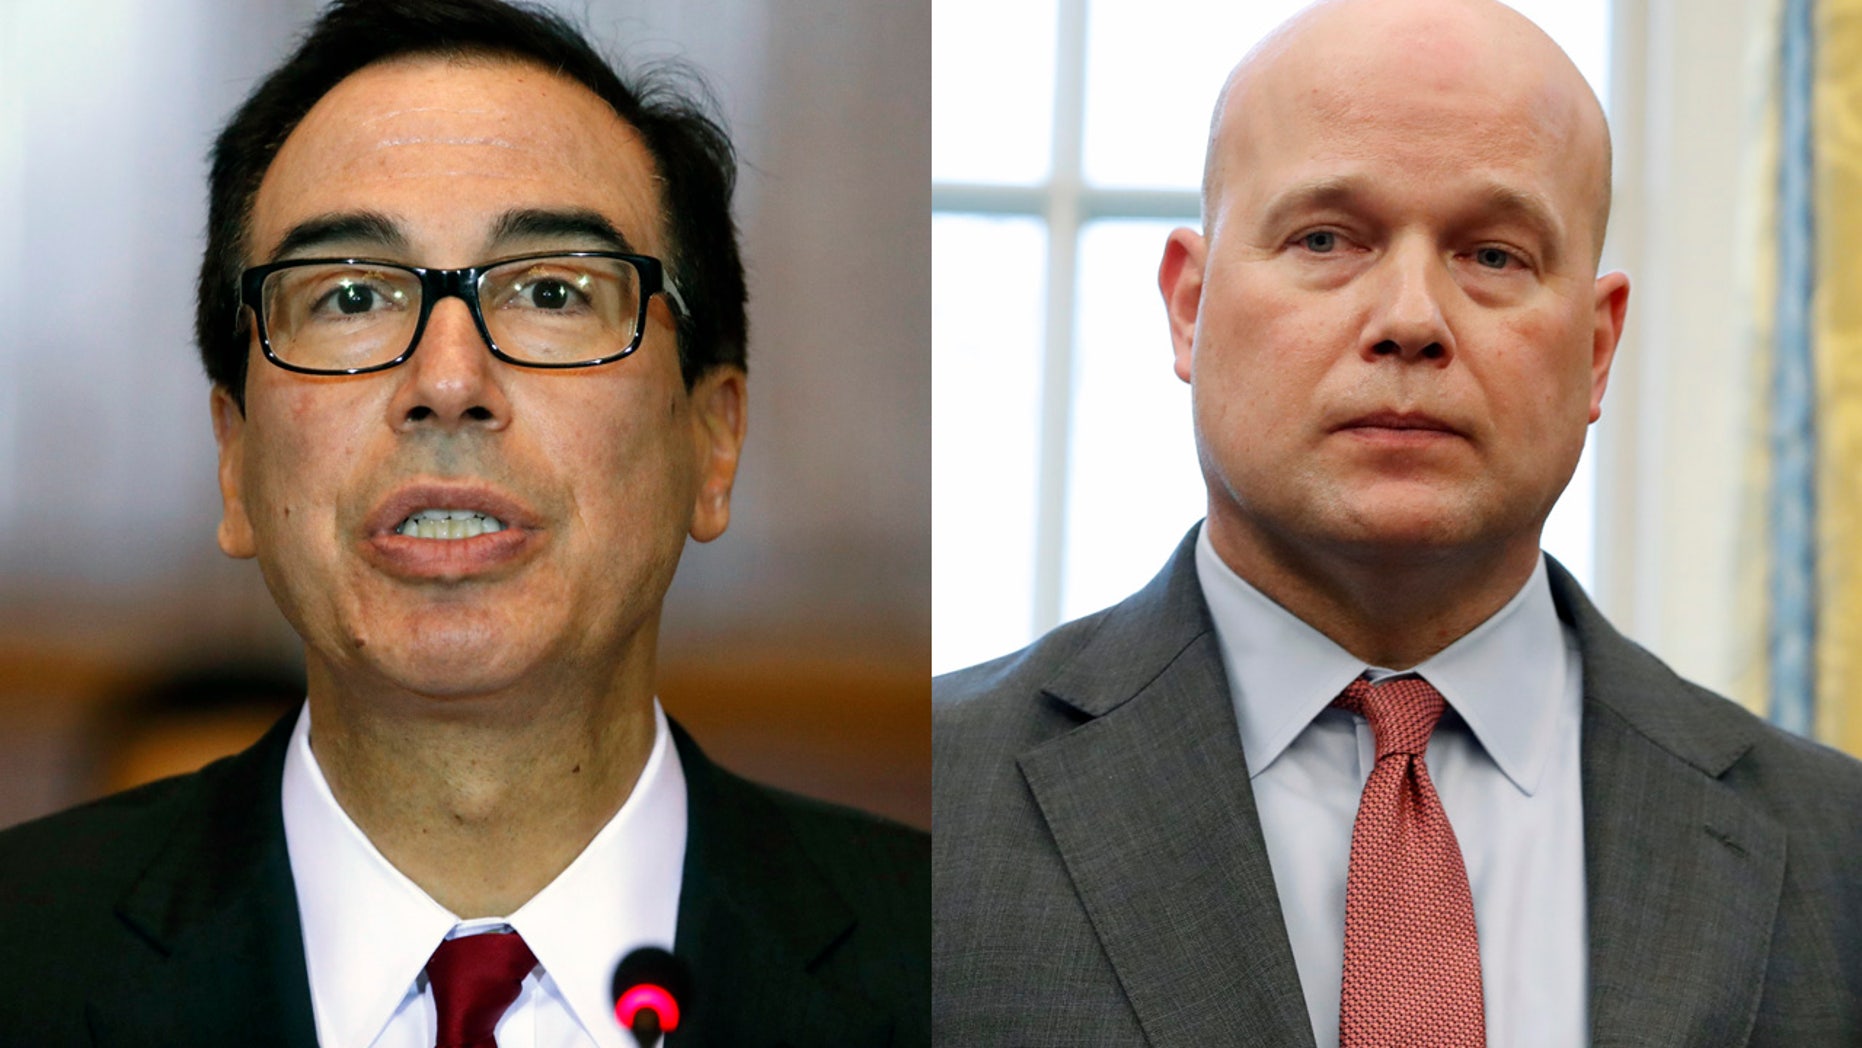 Mnuchin to brief House on Russia sanctions decision, Dems demand acting AG Whitaker testify this month